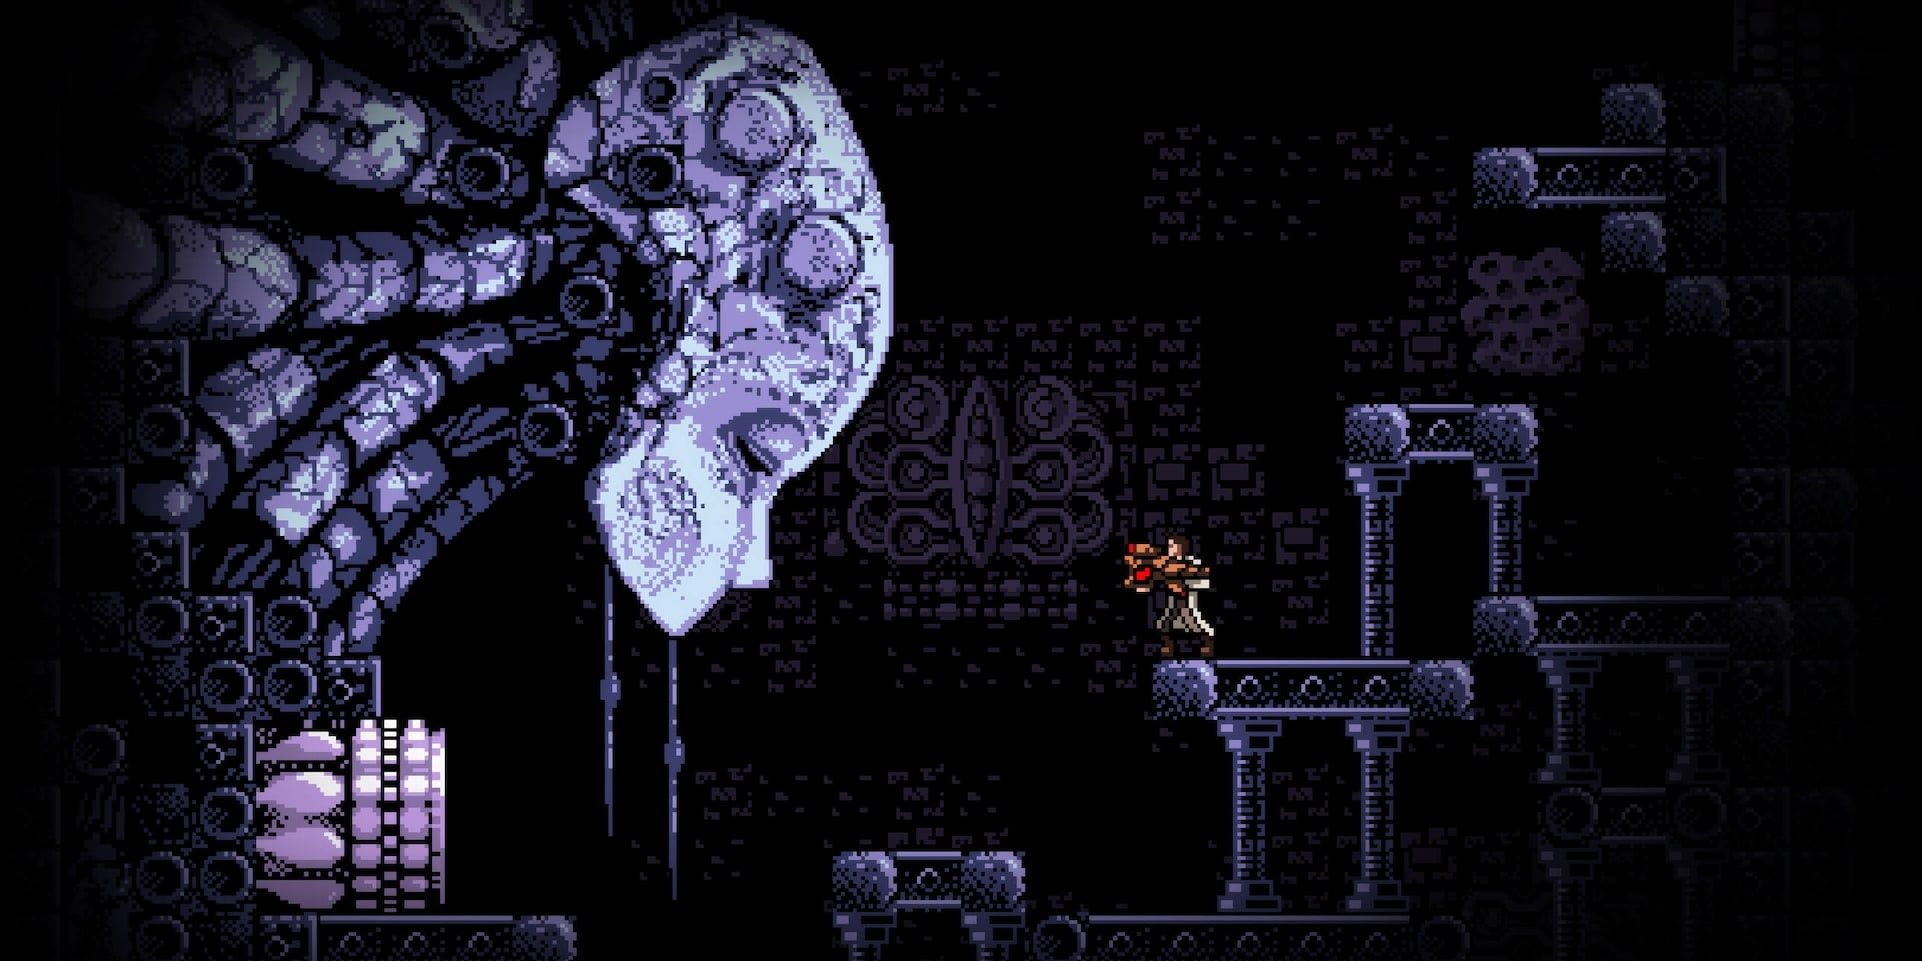 A screenshot showing gameplay in Axiom Verge